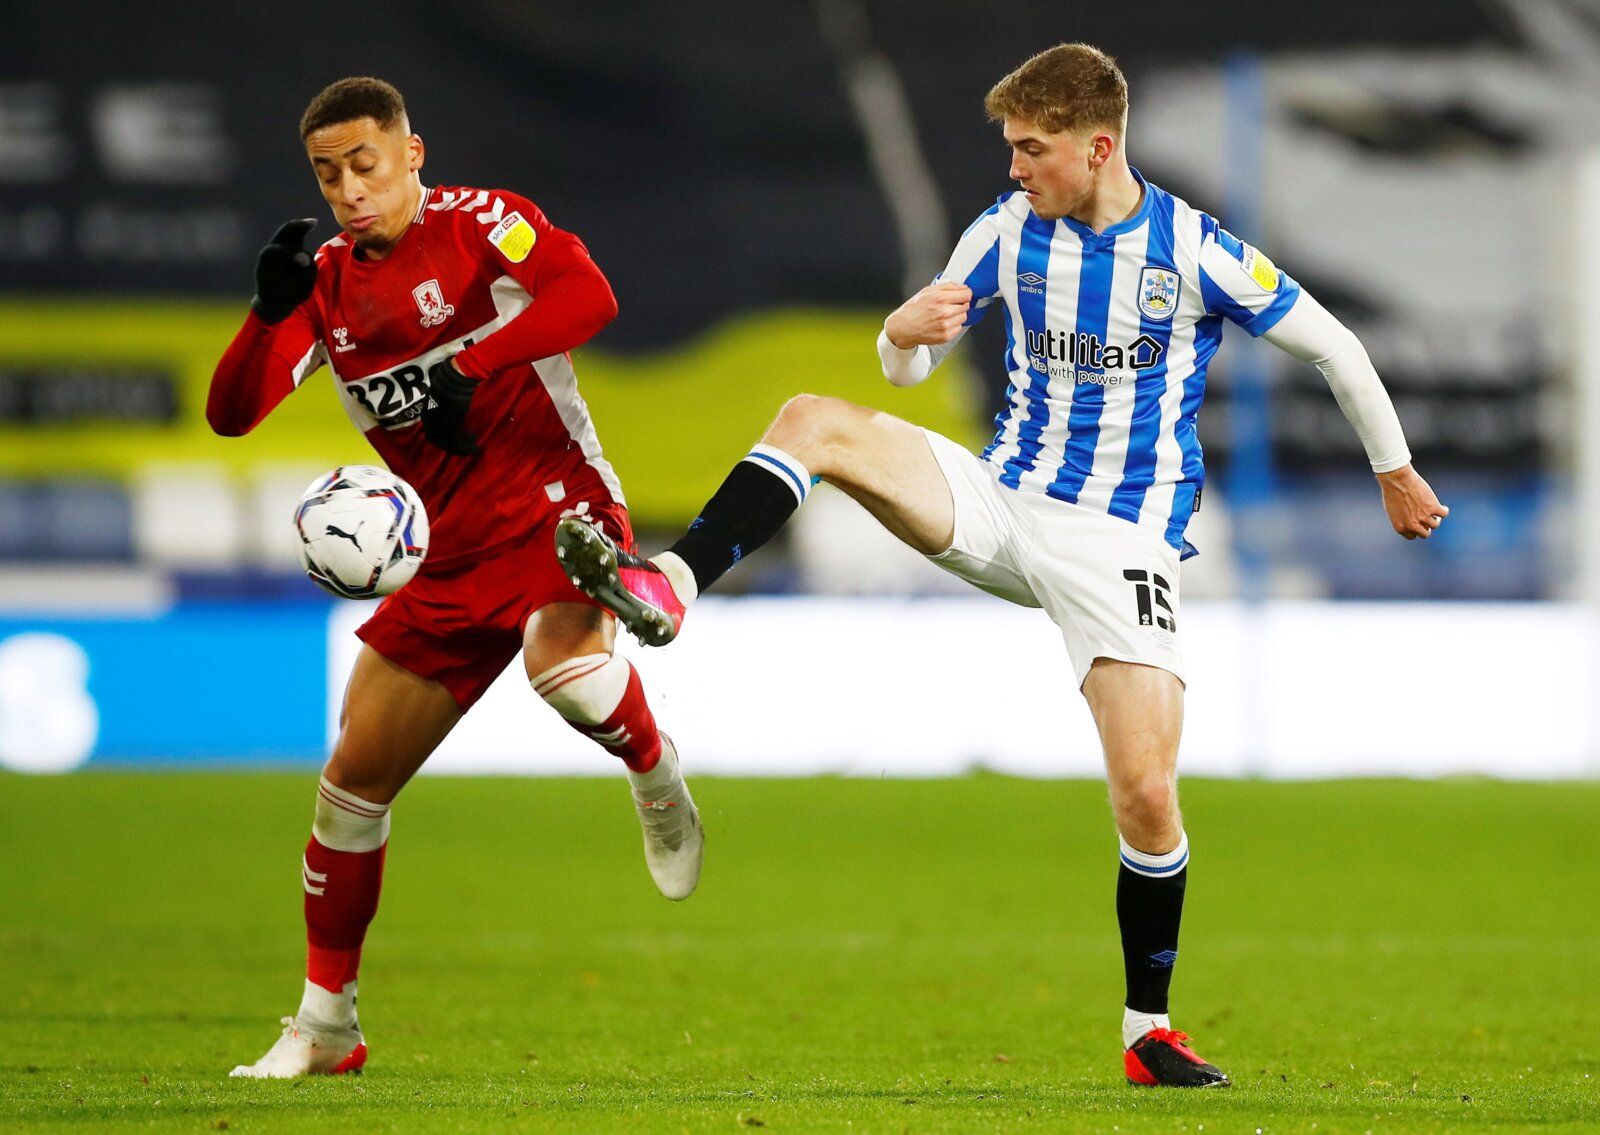 Soccer Football - Championship - Huddersfield Town v Middlesbrough - John Smith's Stadium, Huddersfield, Britain - November 27, 2021 Middlesbrough's Marcus Tavernier in action with Huddersfield Town's Scott High   Action Images/Jason Cairnduff